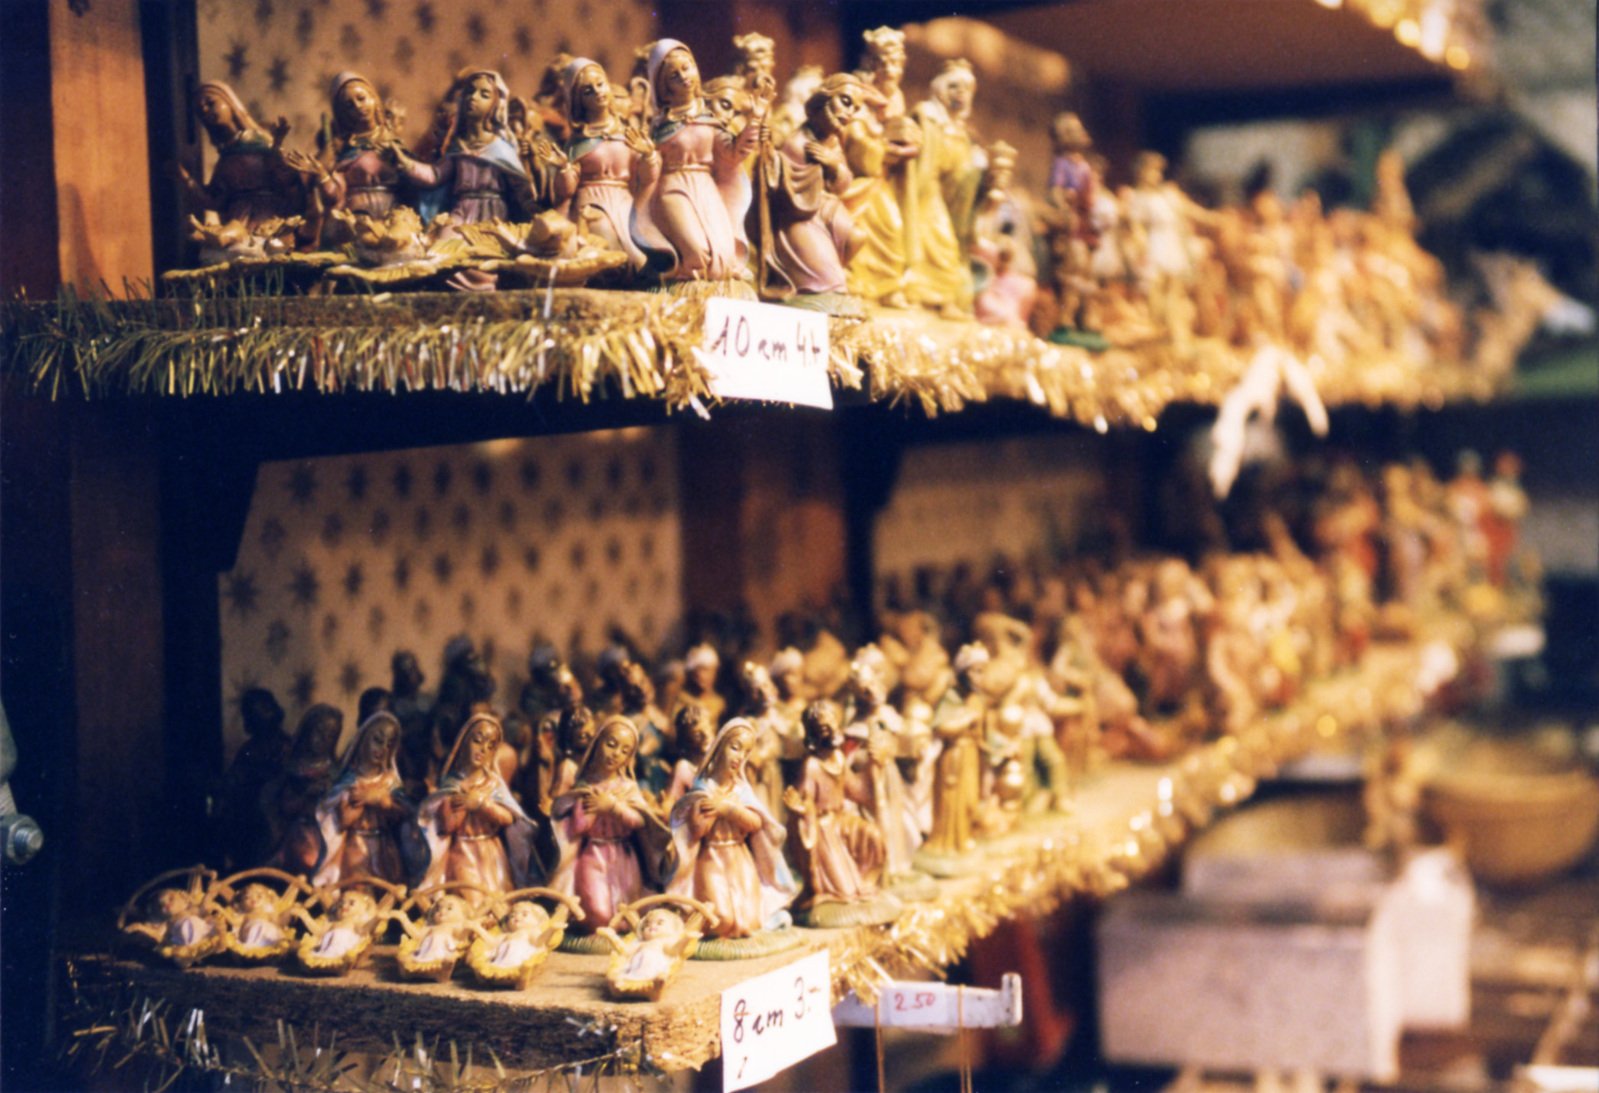 figurines of different sizes sitting on shelves at a store